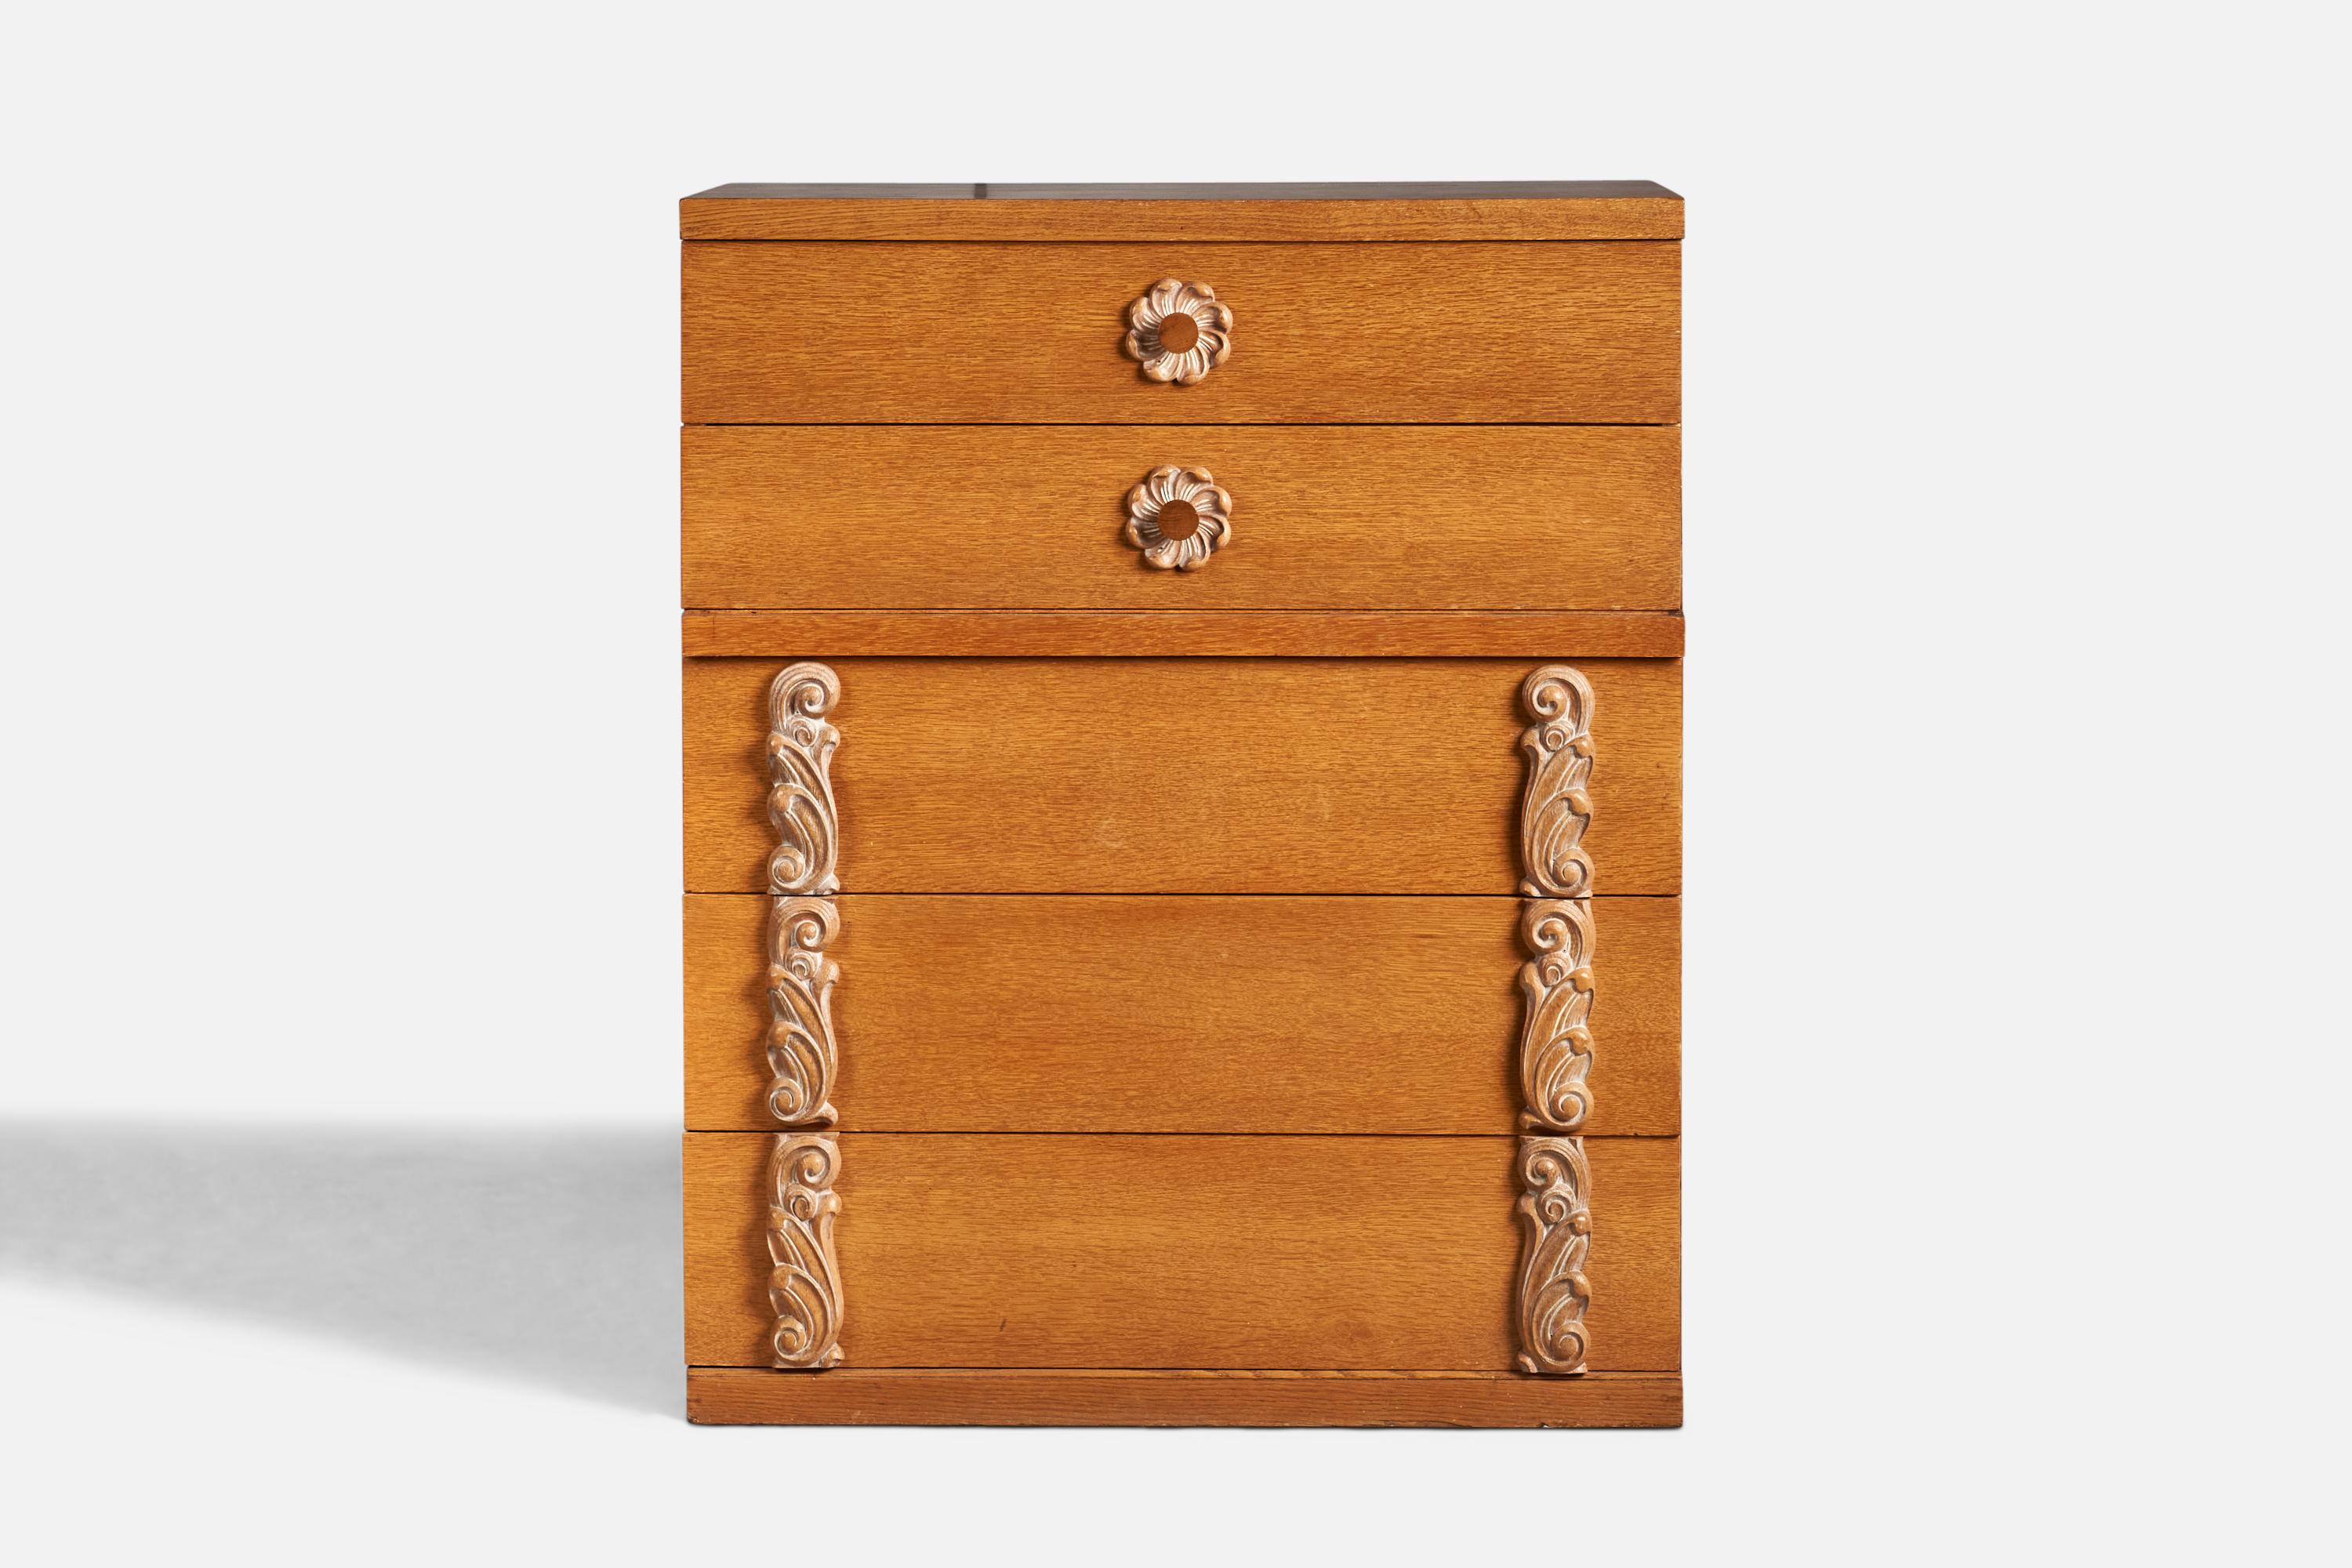 An oak chest of drawers with cerused detailing designed and produced in the US, c. 1940s.